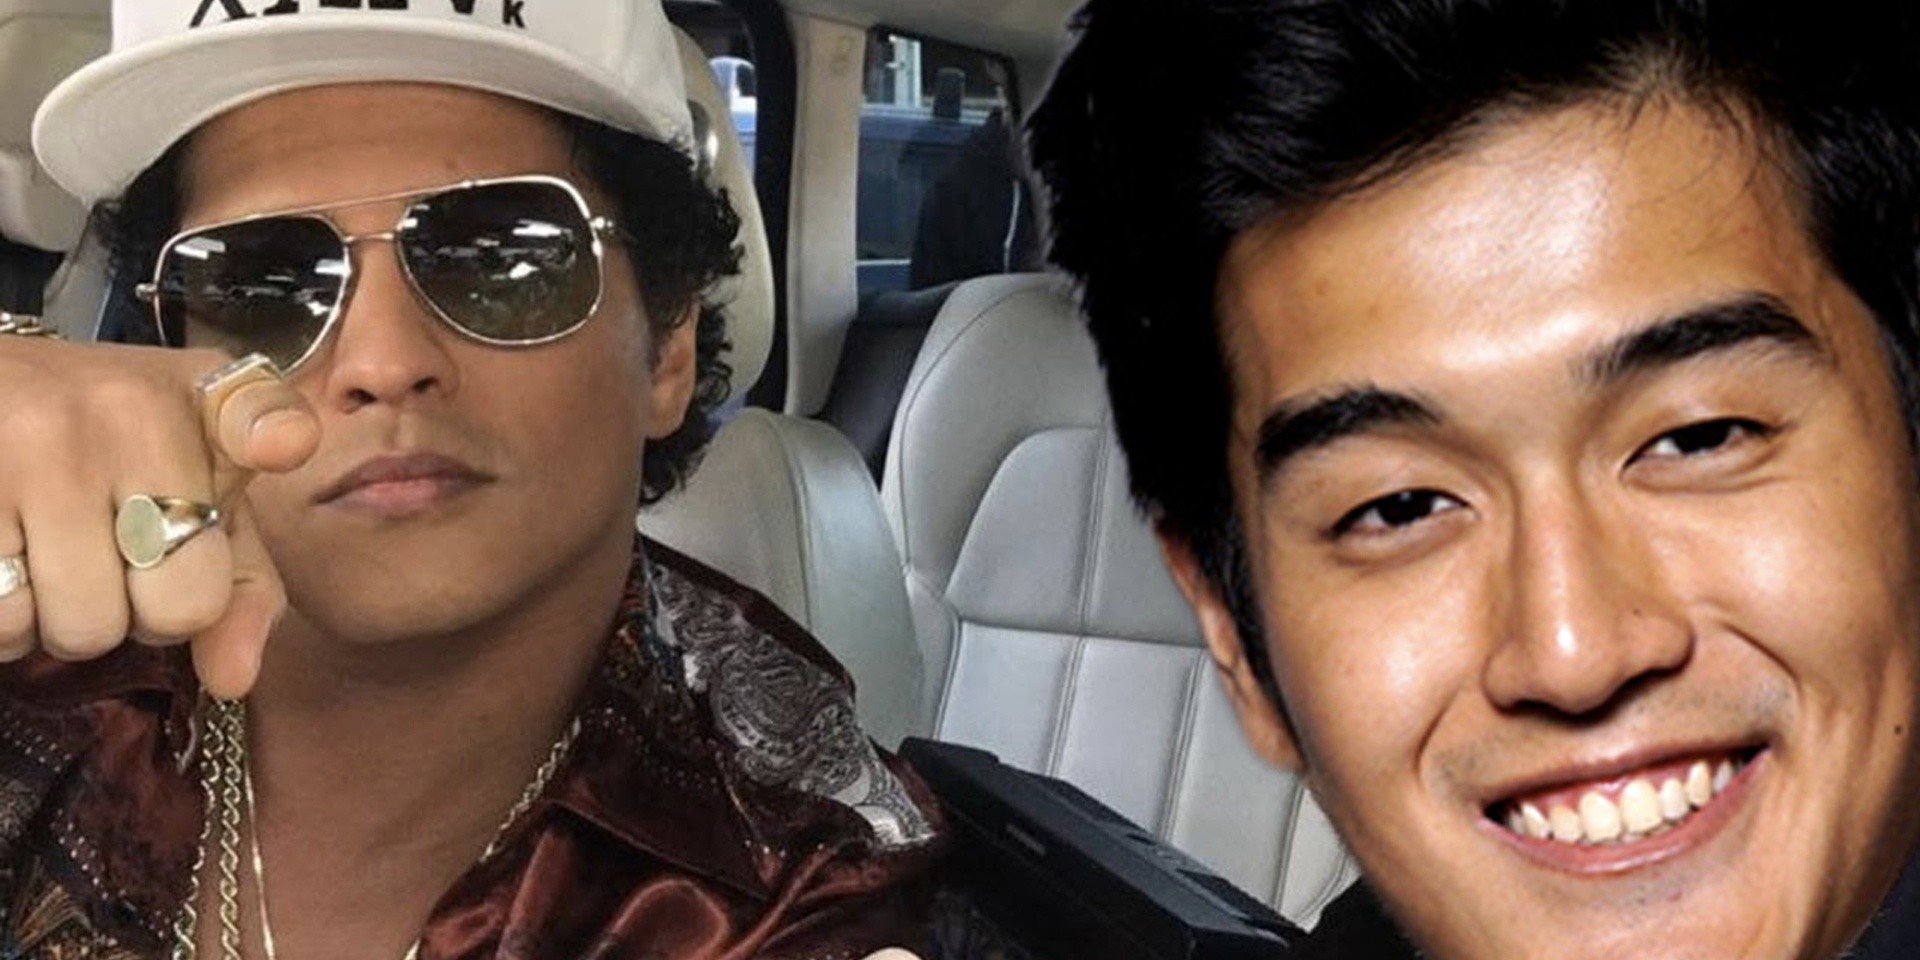 You could sing Bruno Mars songs in a Grab car with Nathan Hartono, Sam Rui, Tim De Cotta or more